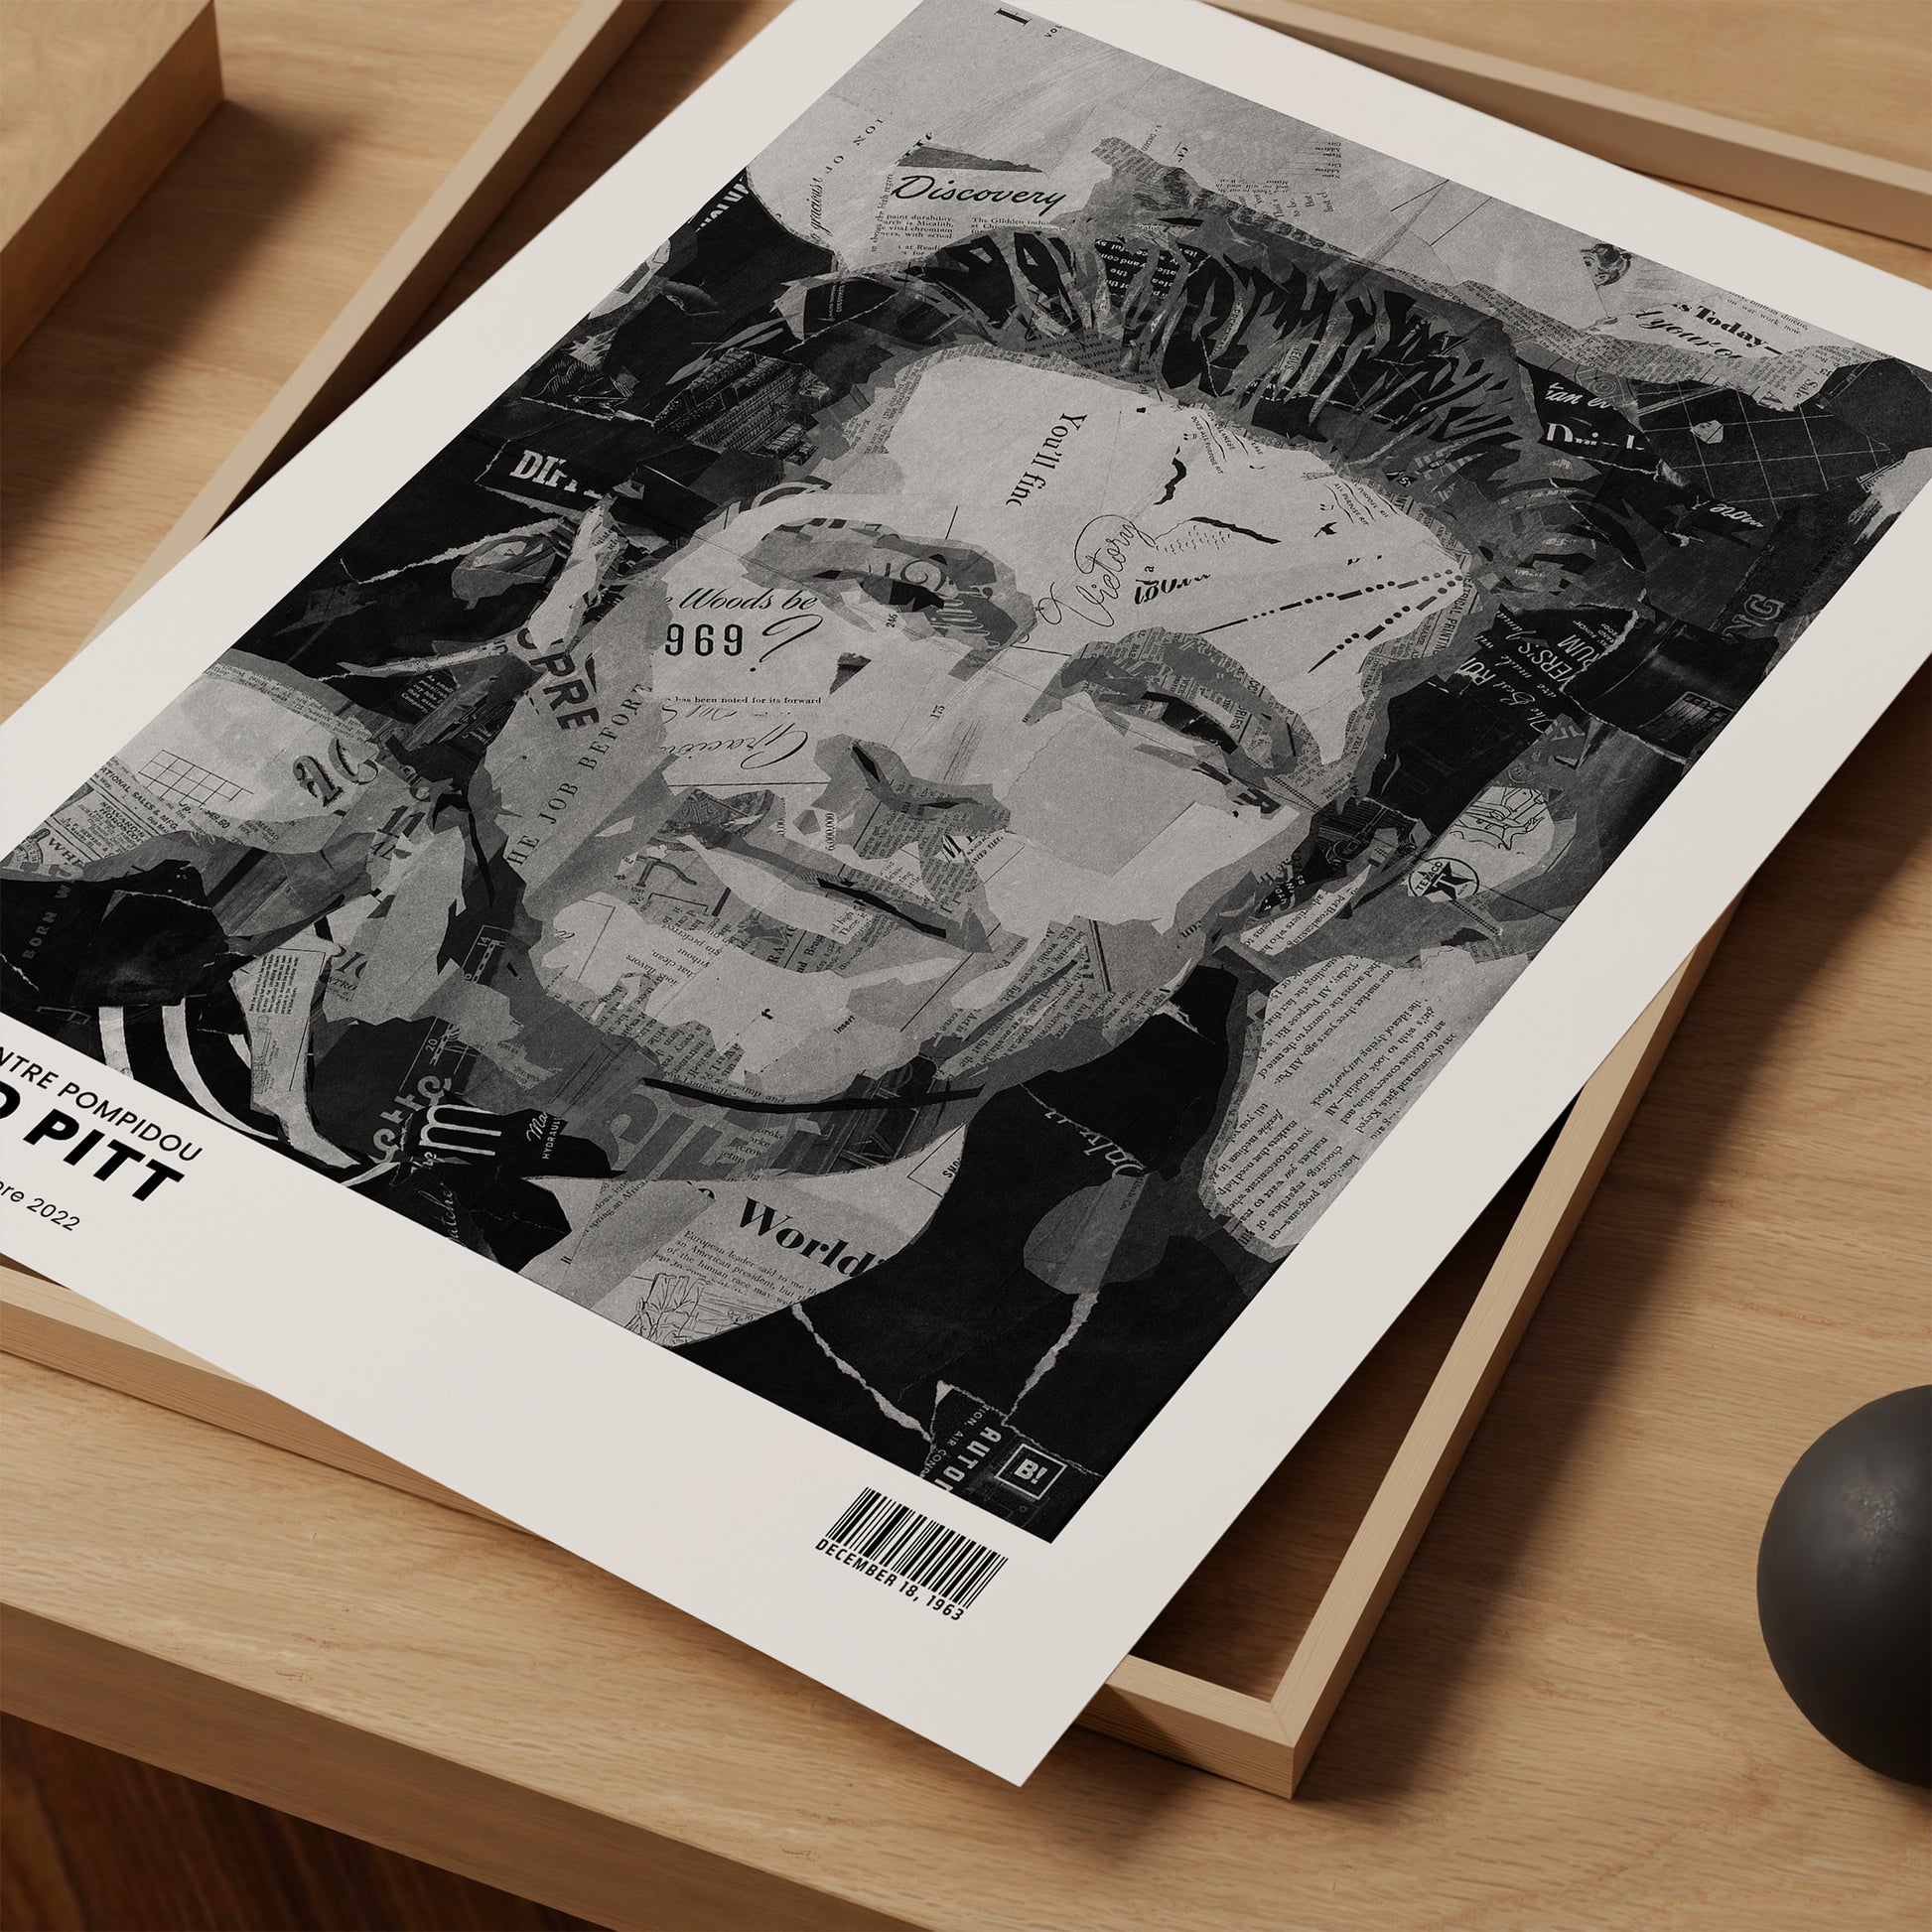 Be inspired by Iconic Brad Pitt Paris Centre Pompidou Exhibition Art Print. The artwork is presented as a print close up that captures its timeless beauty in every detail.